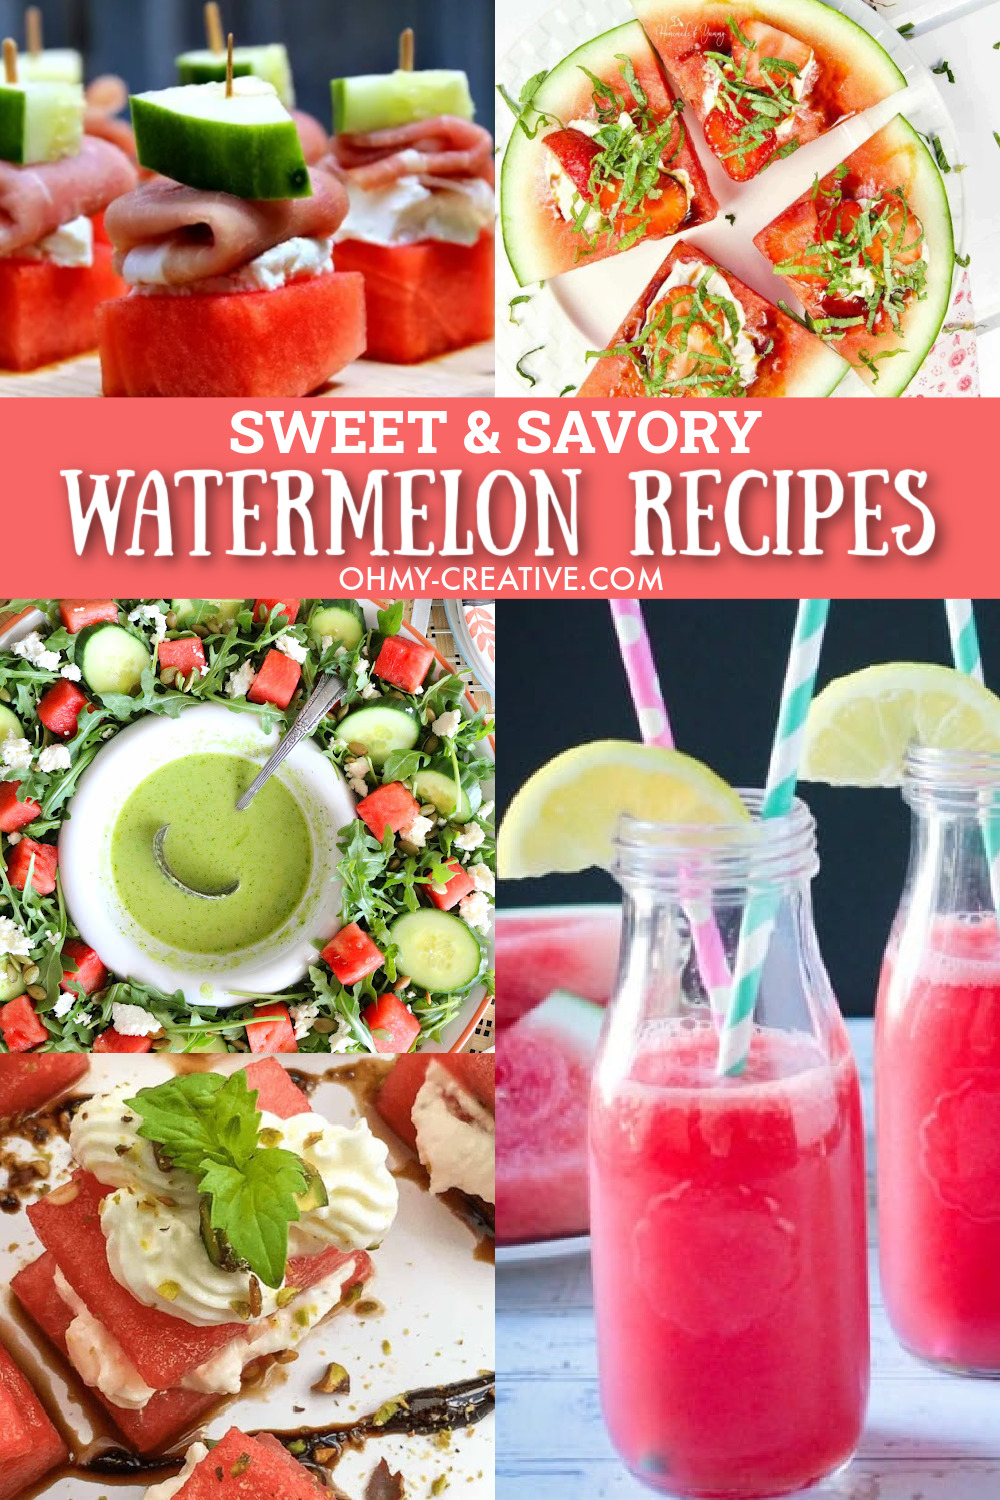 Here is a great collection of sweet and savory watermelon recipes to enjoy all summer long!